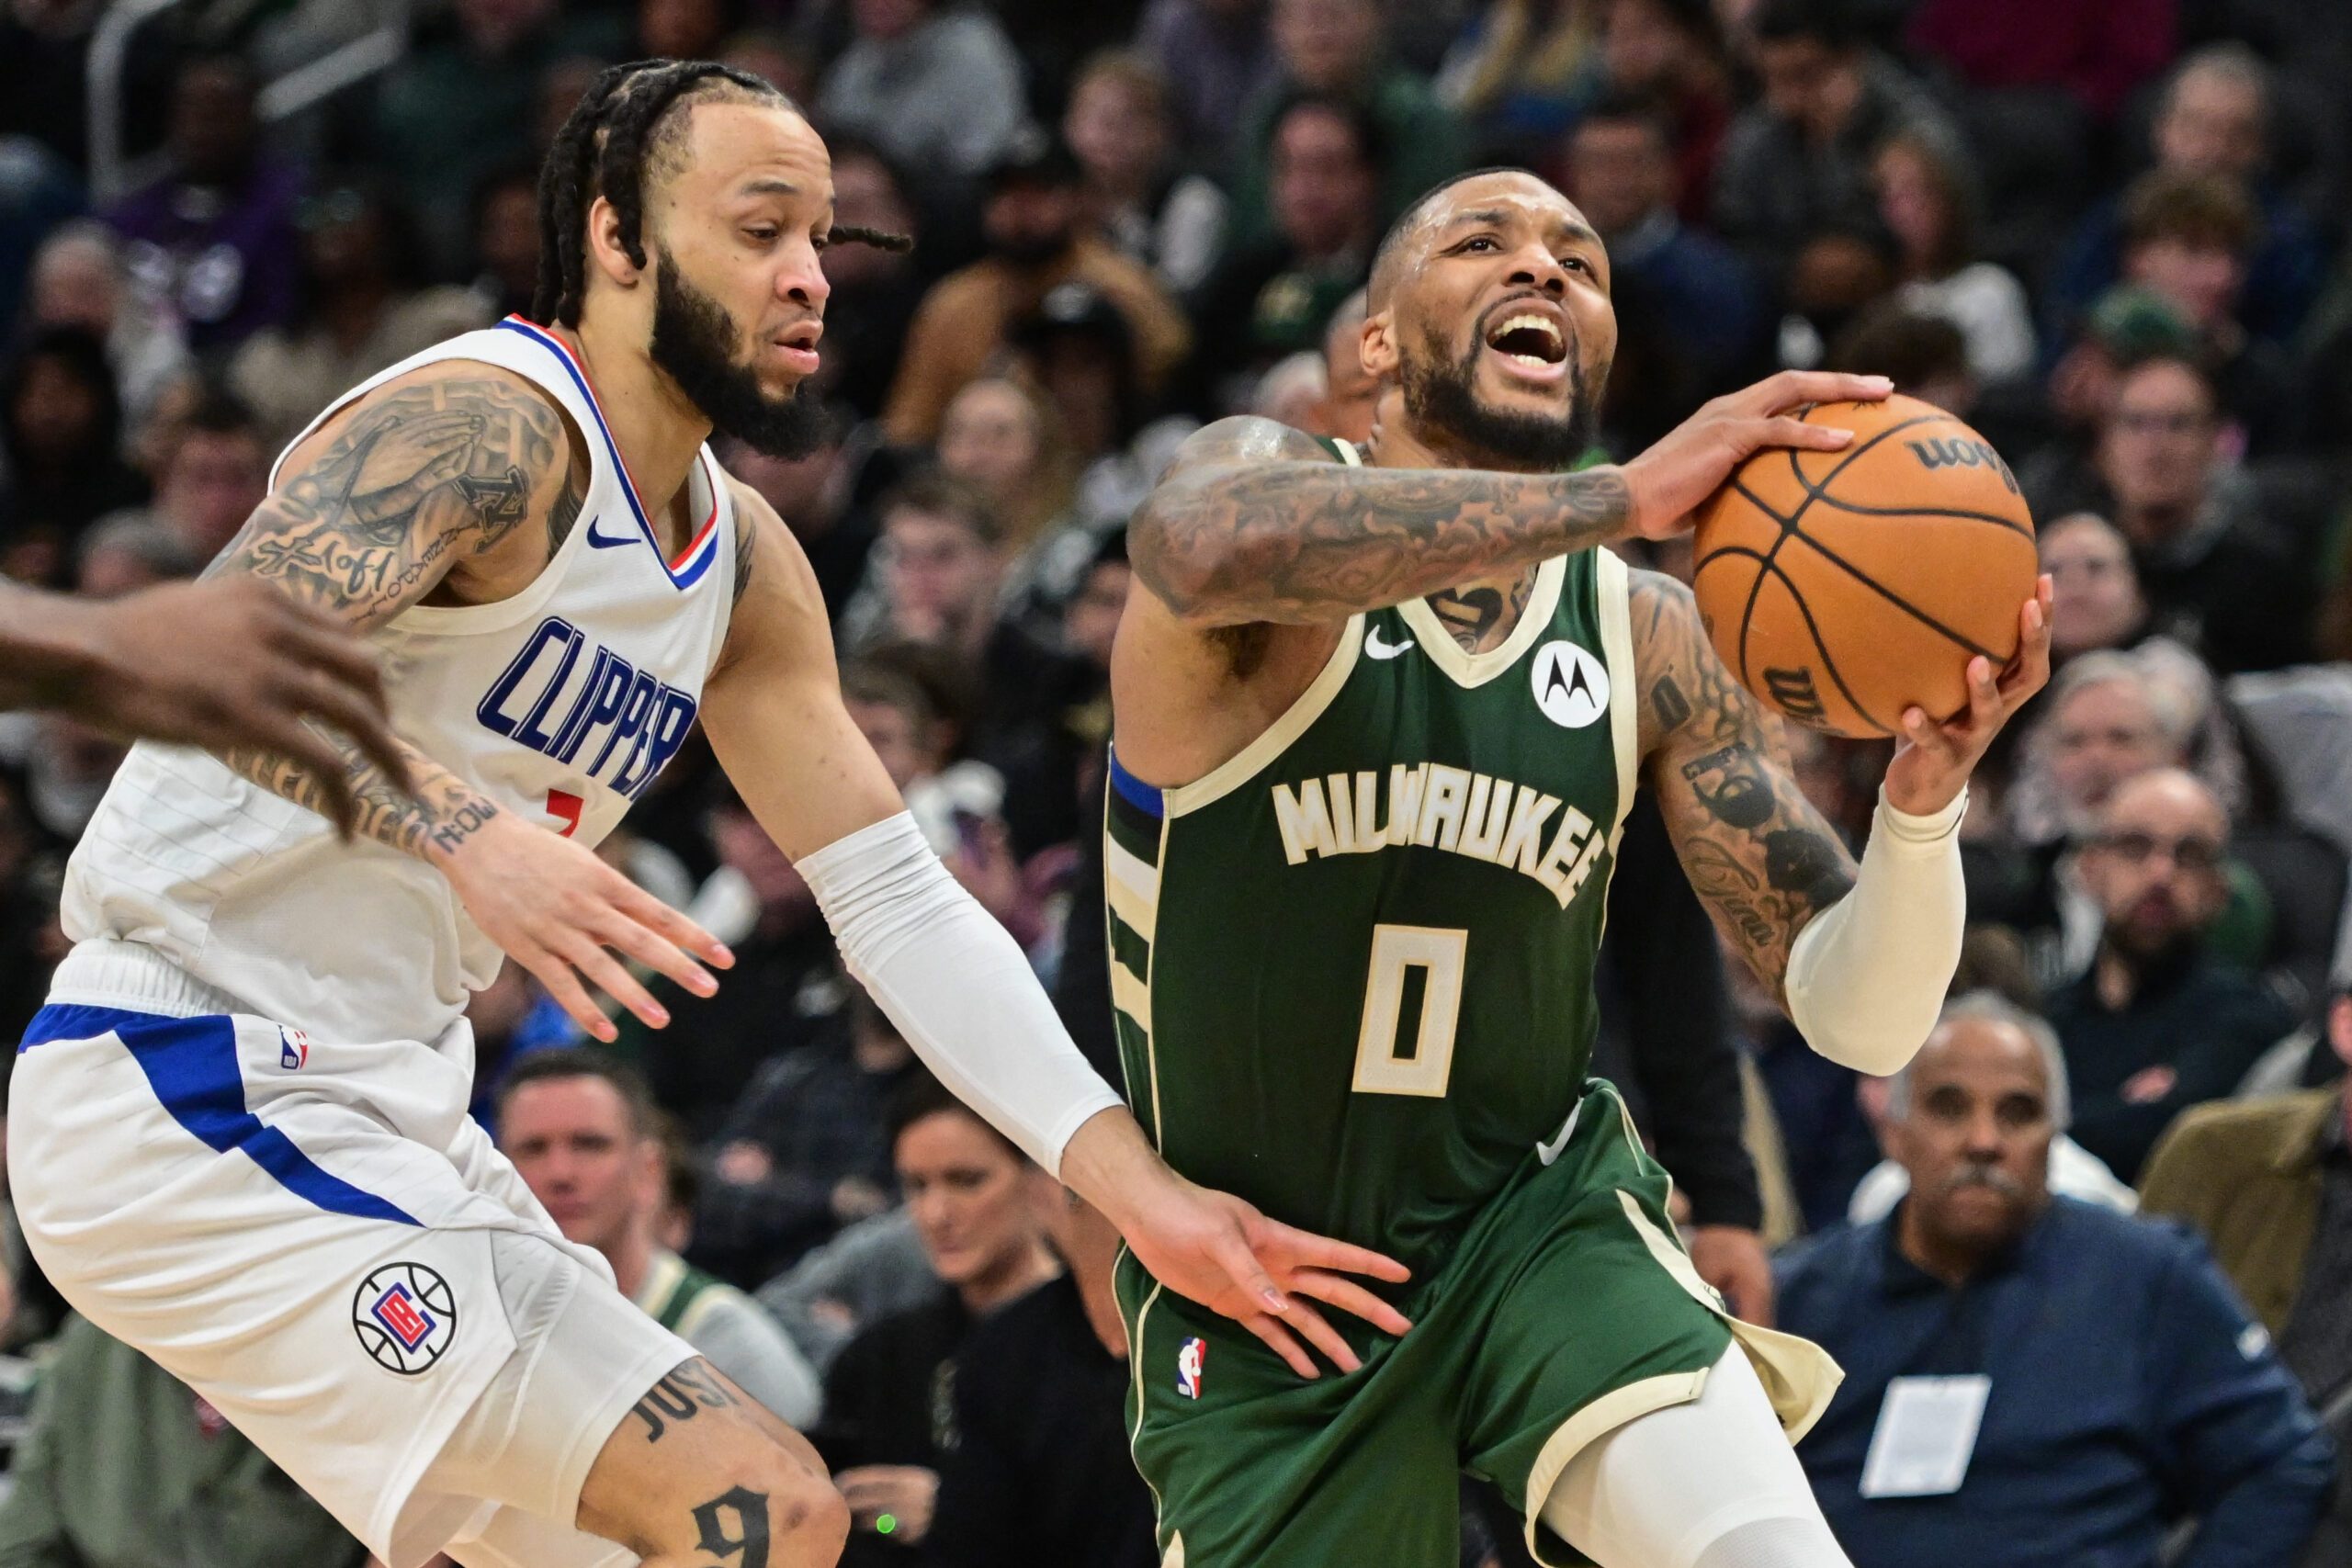 No Giannis, no problem: Damian Lillard drops 41 in Bucks’ outgunning of Clippers